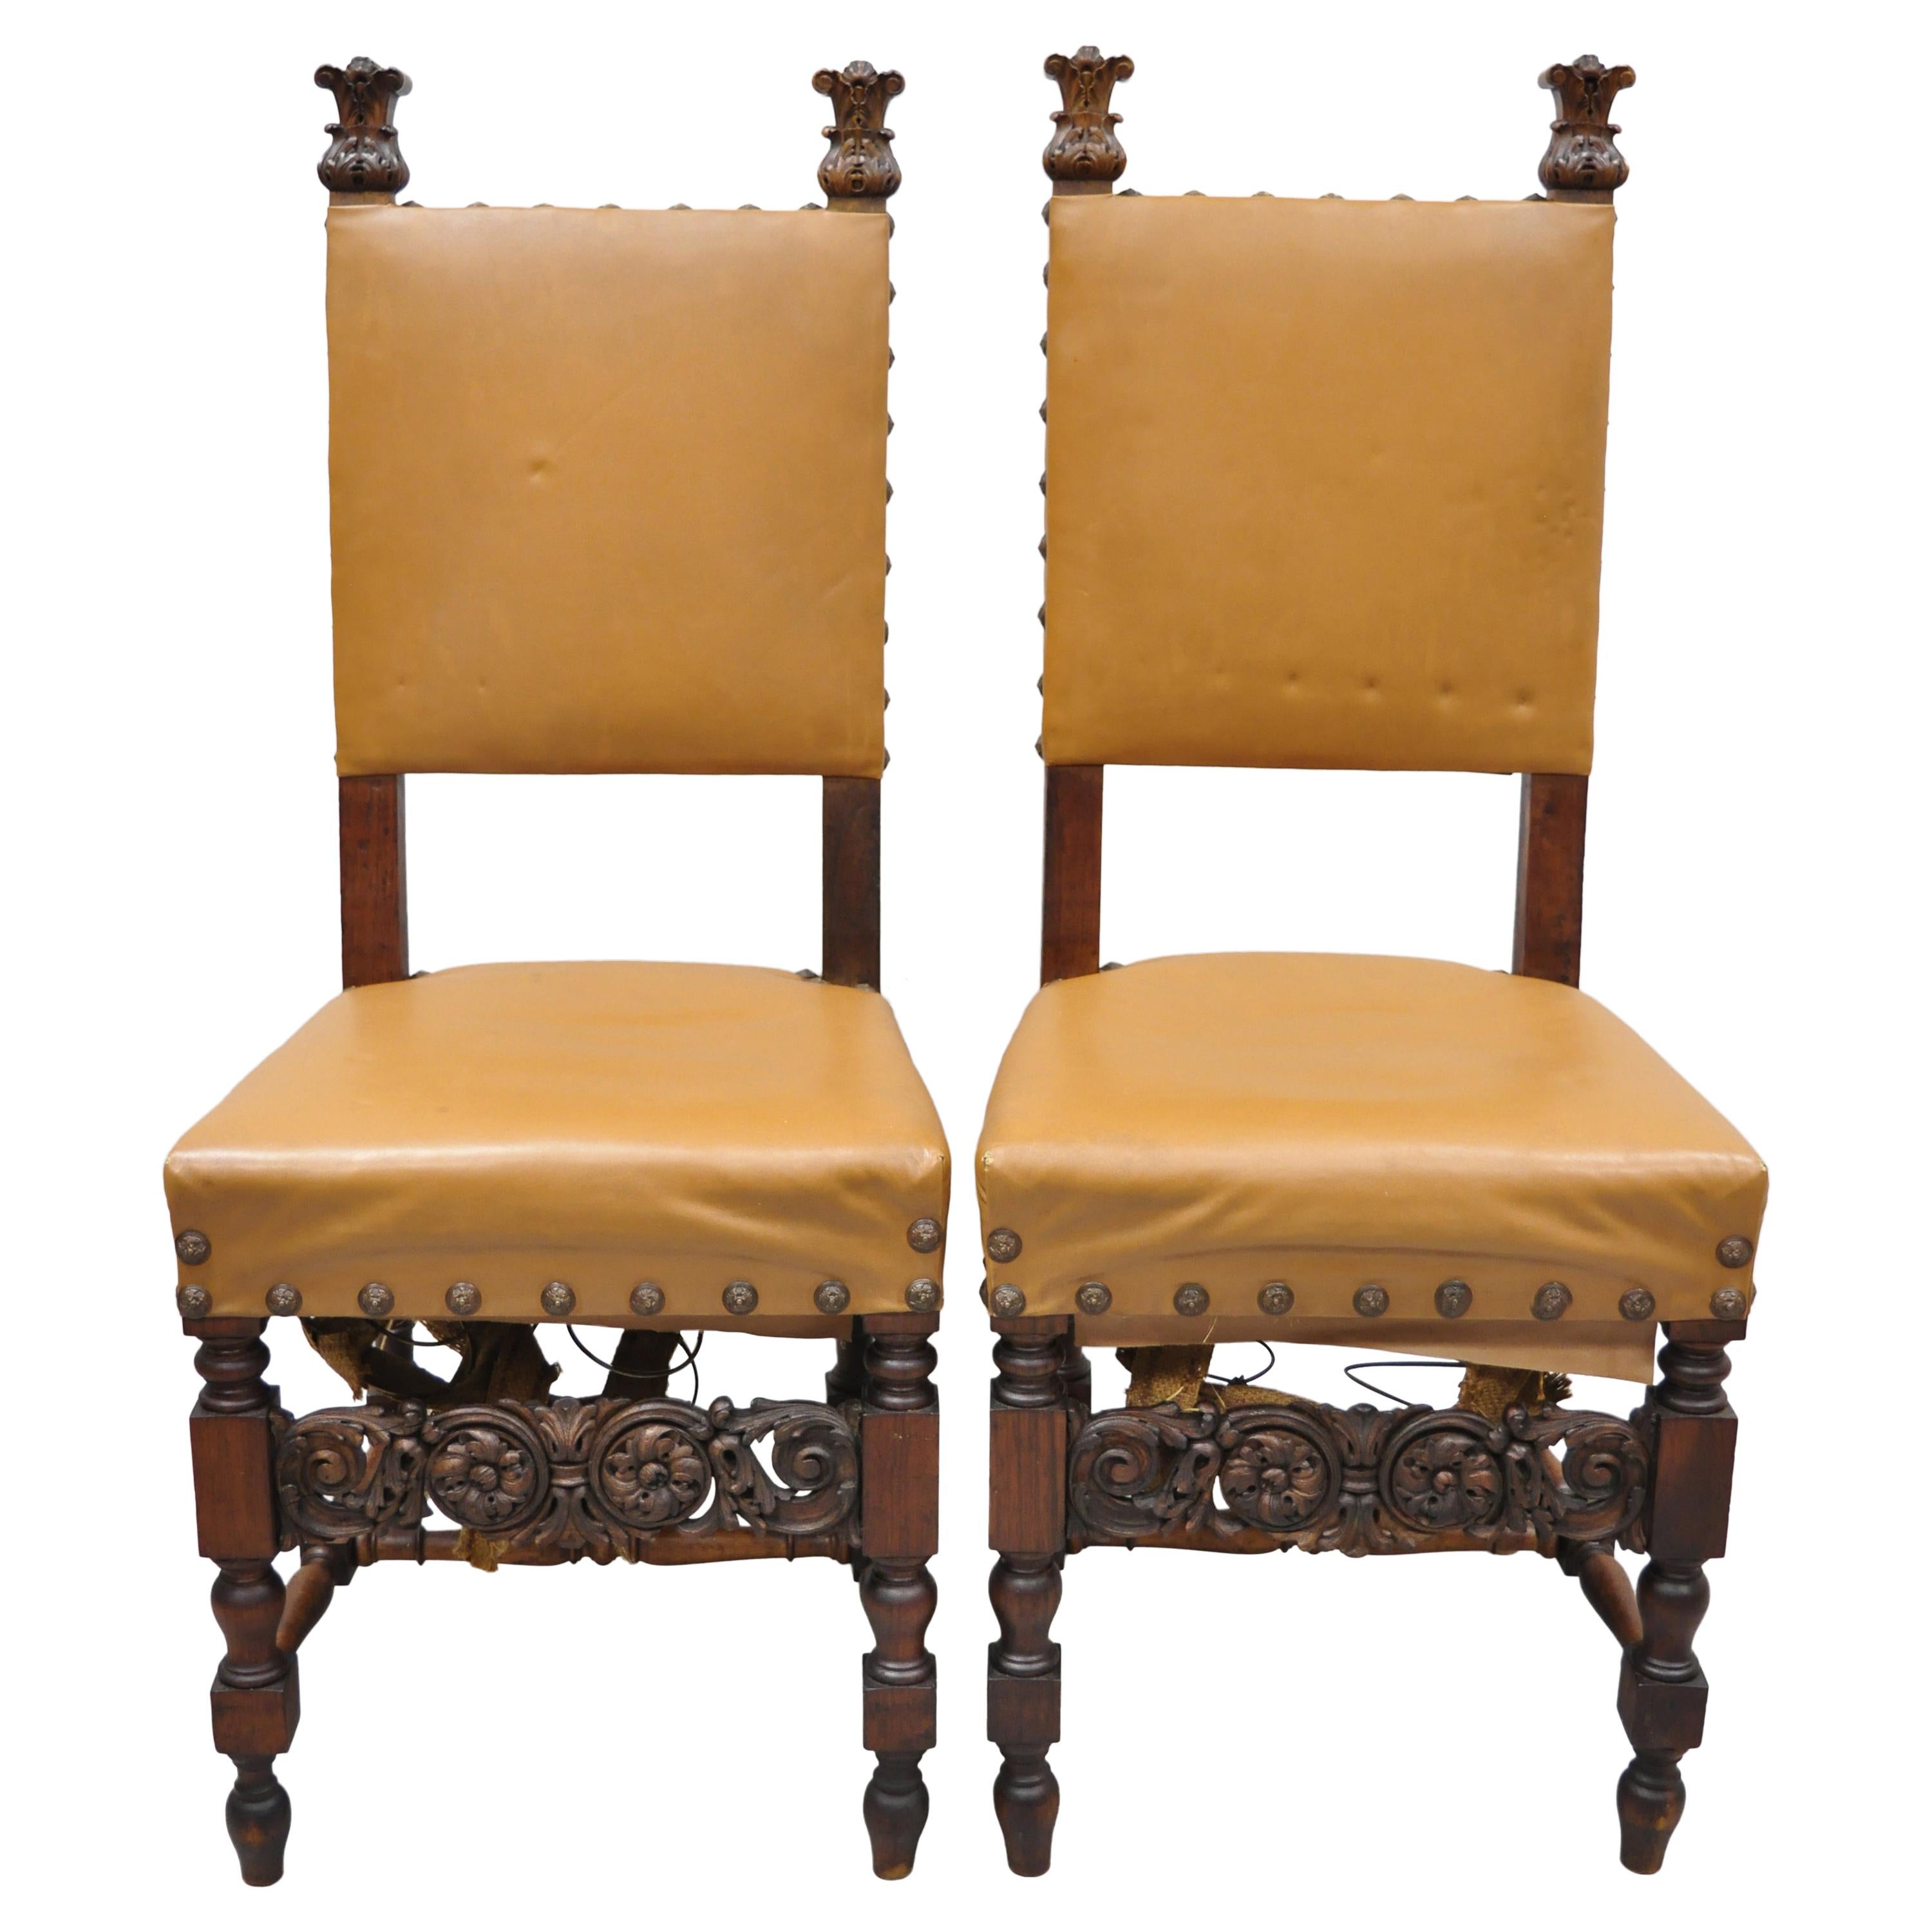 Pair of Antique Italian Renaissance Carved Walnut High Back Side Chairs